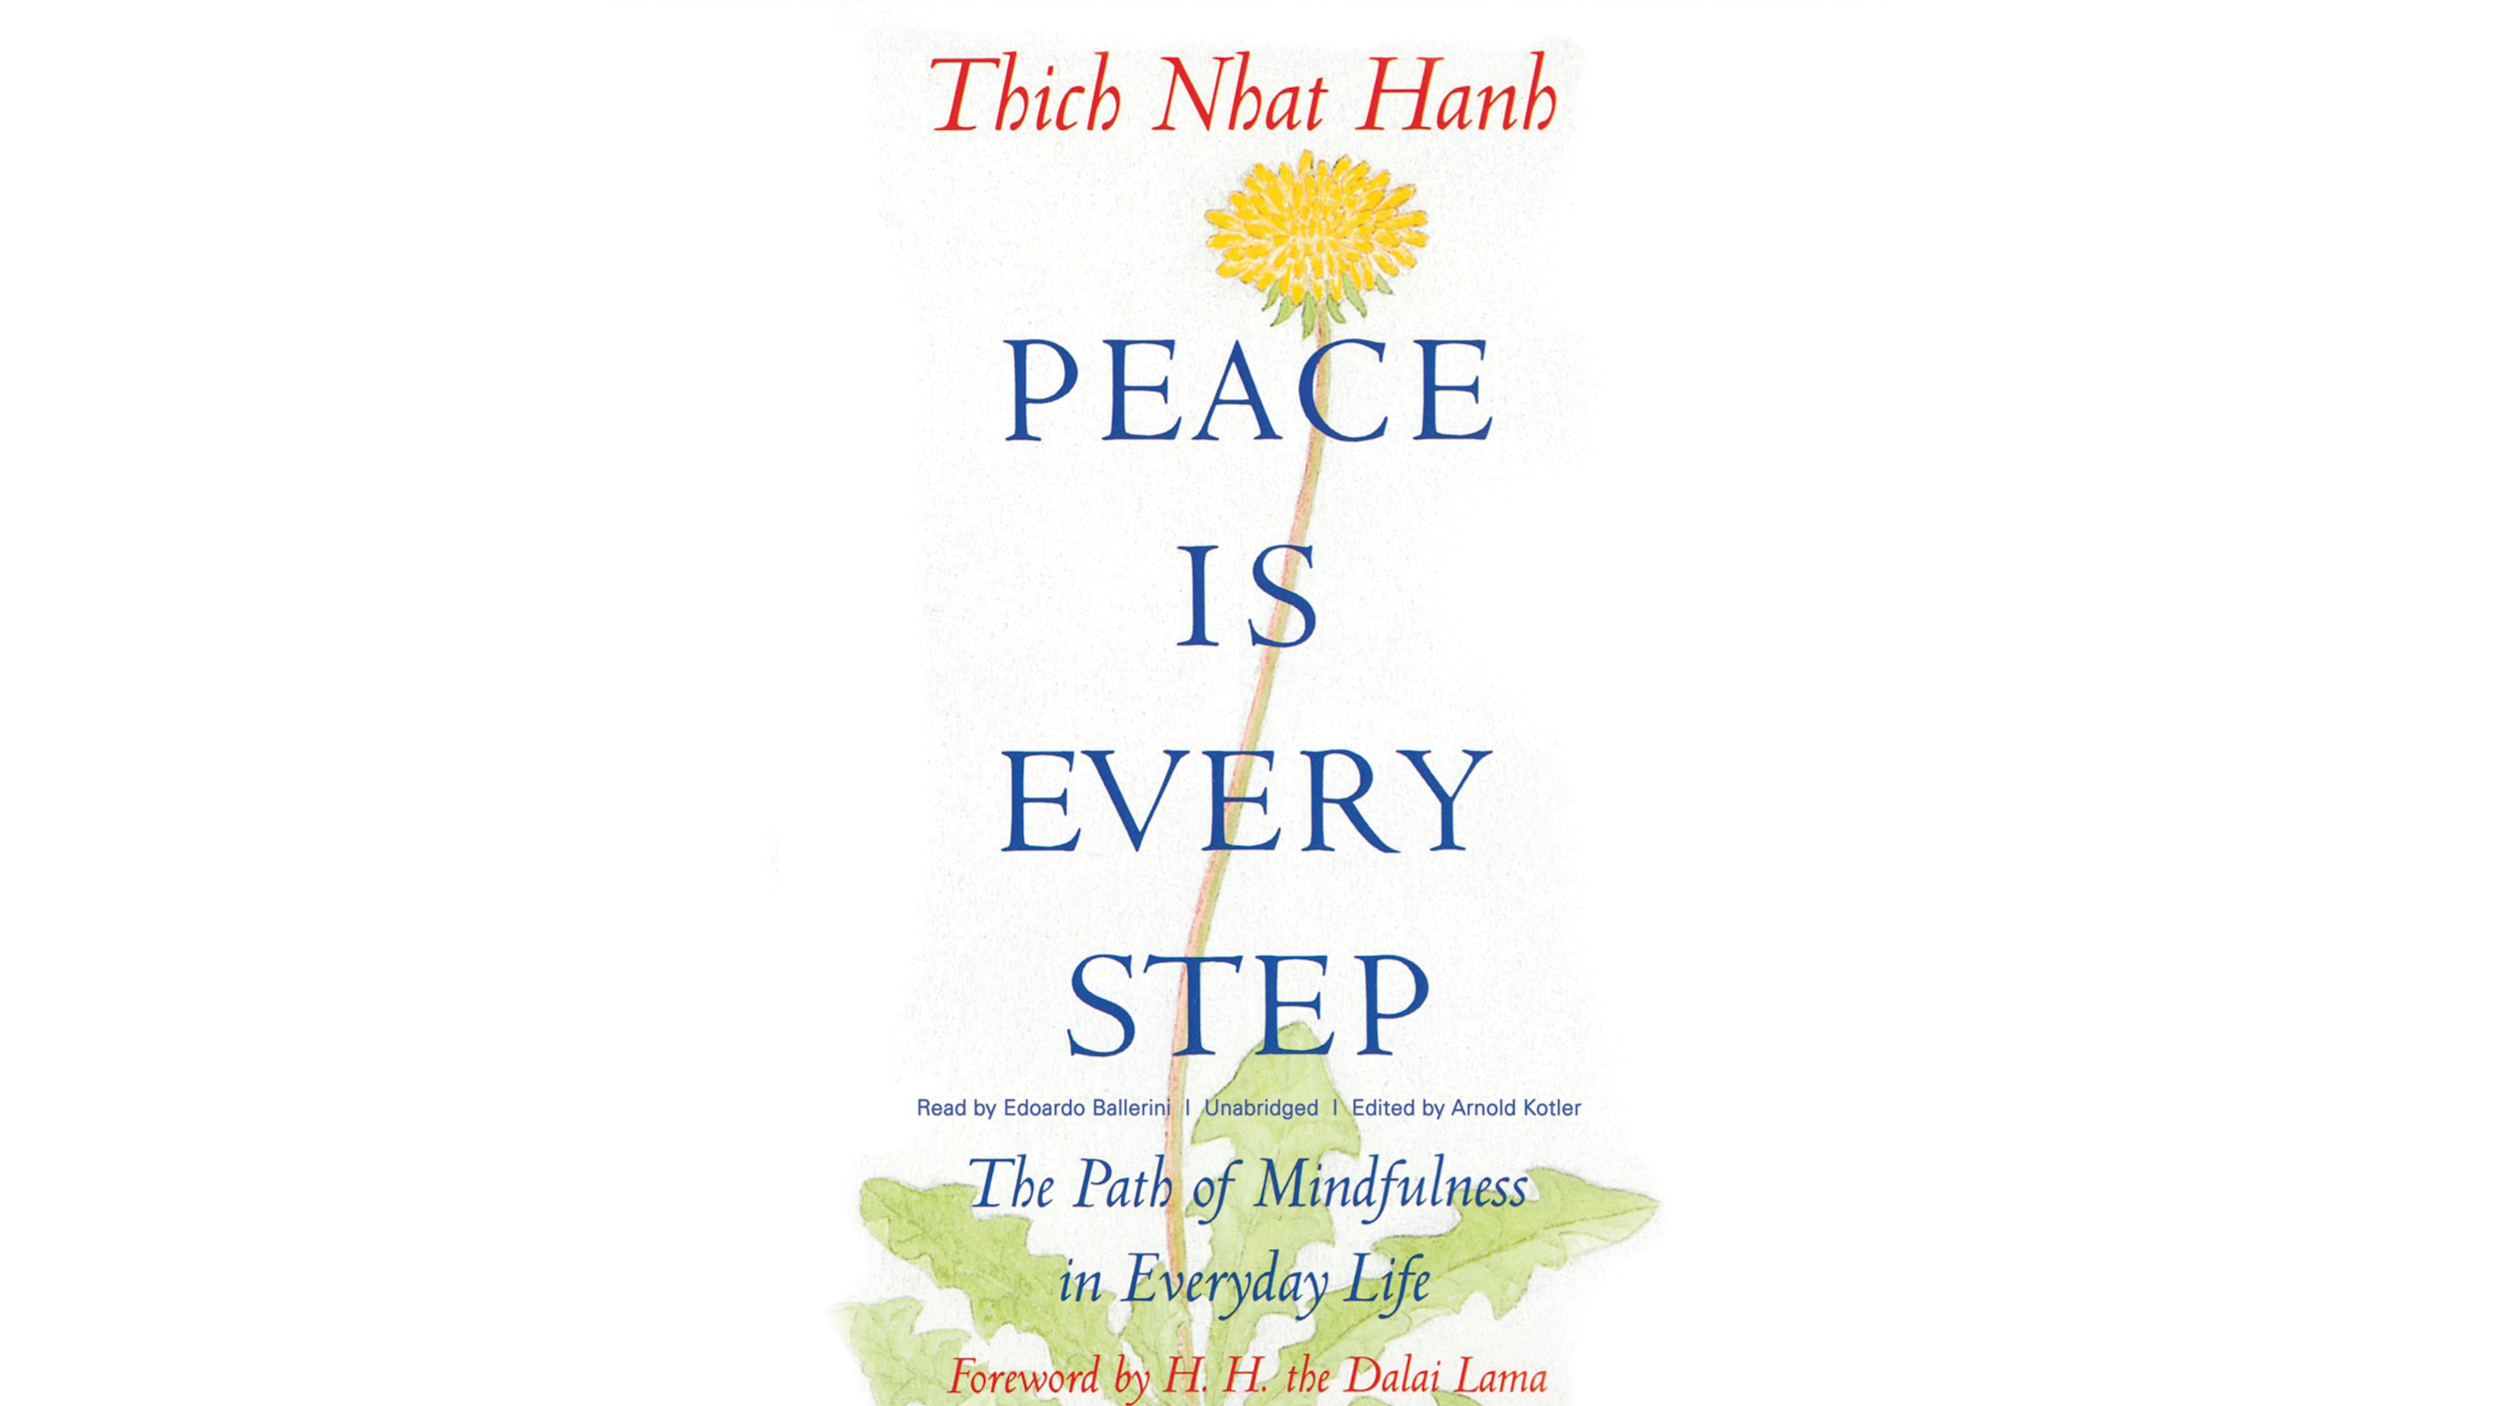 Peace is Every Step book jacket